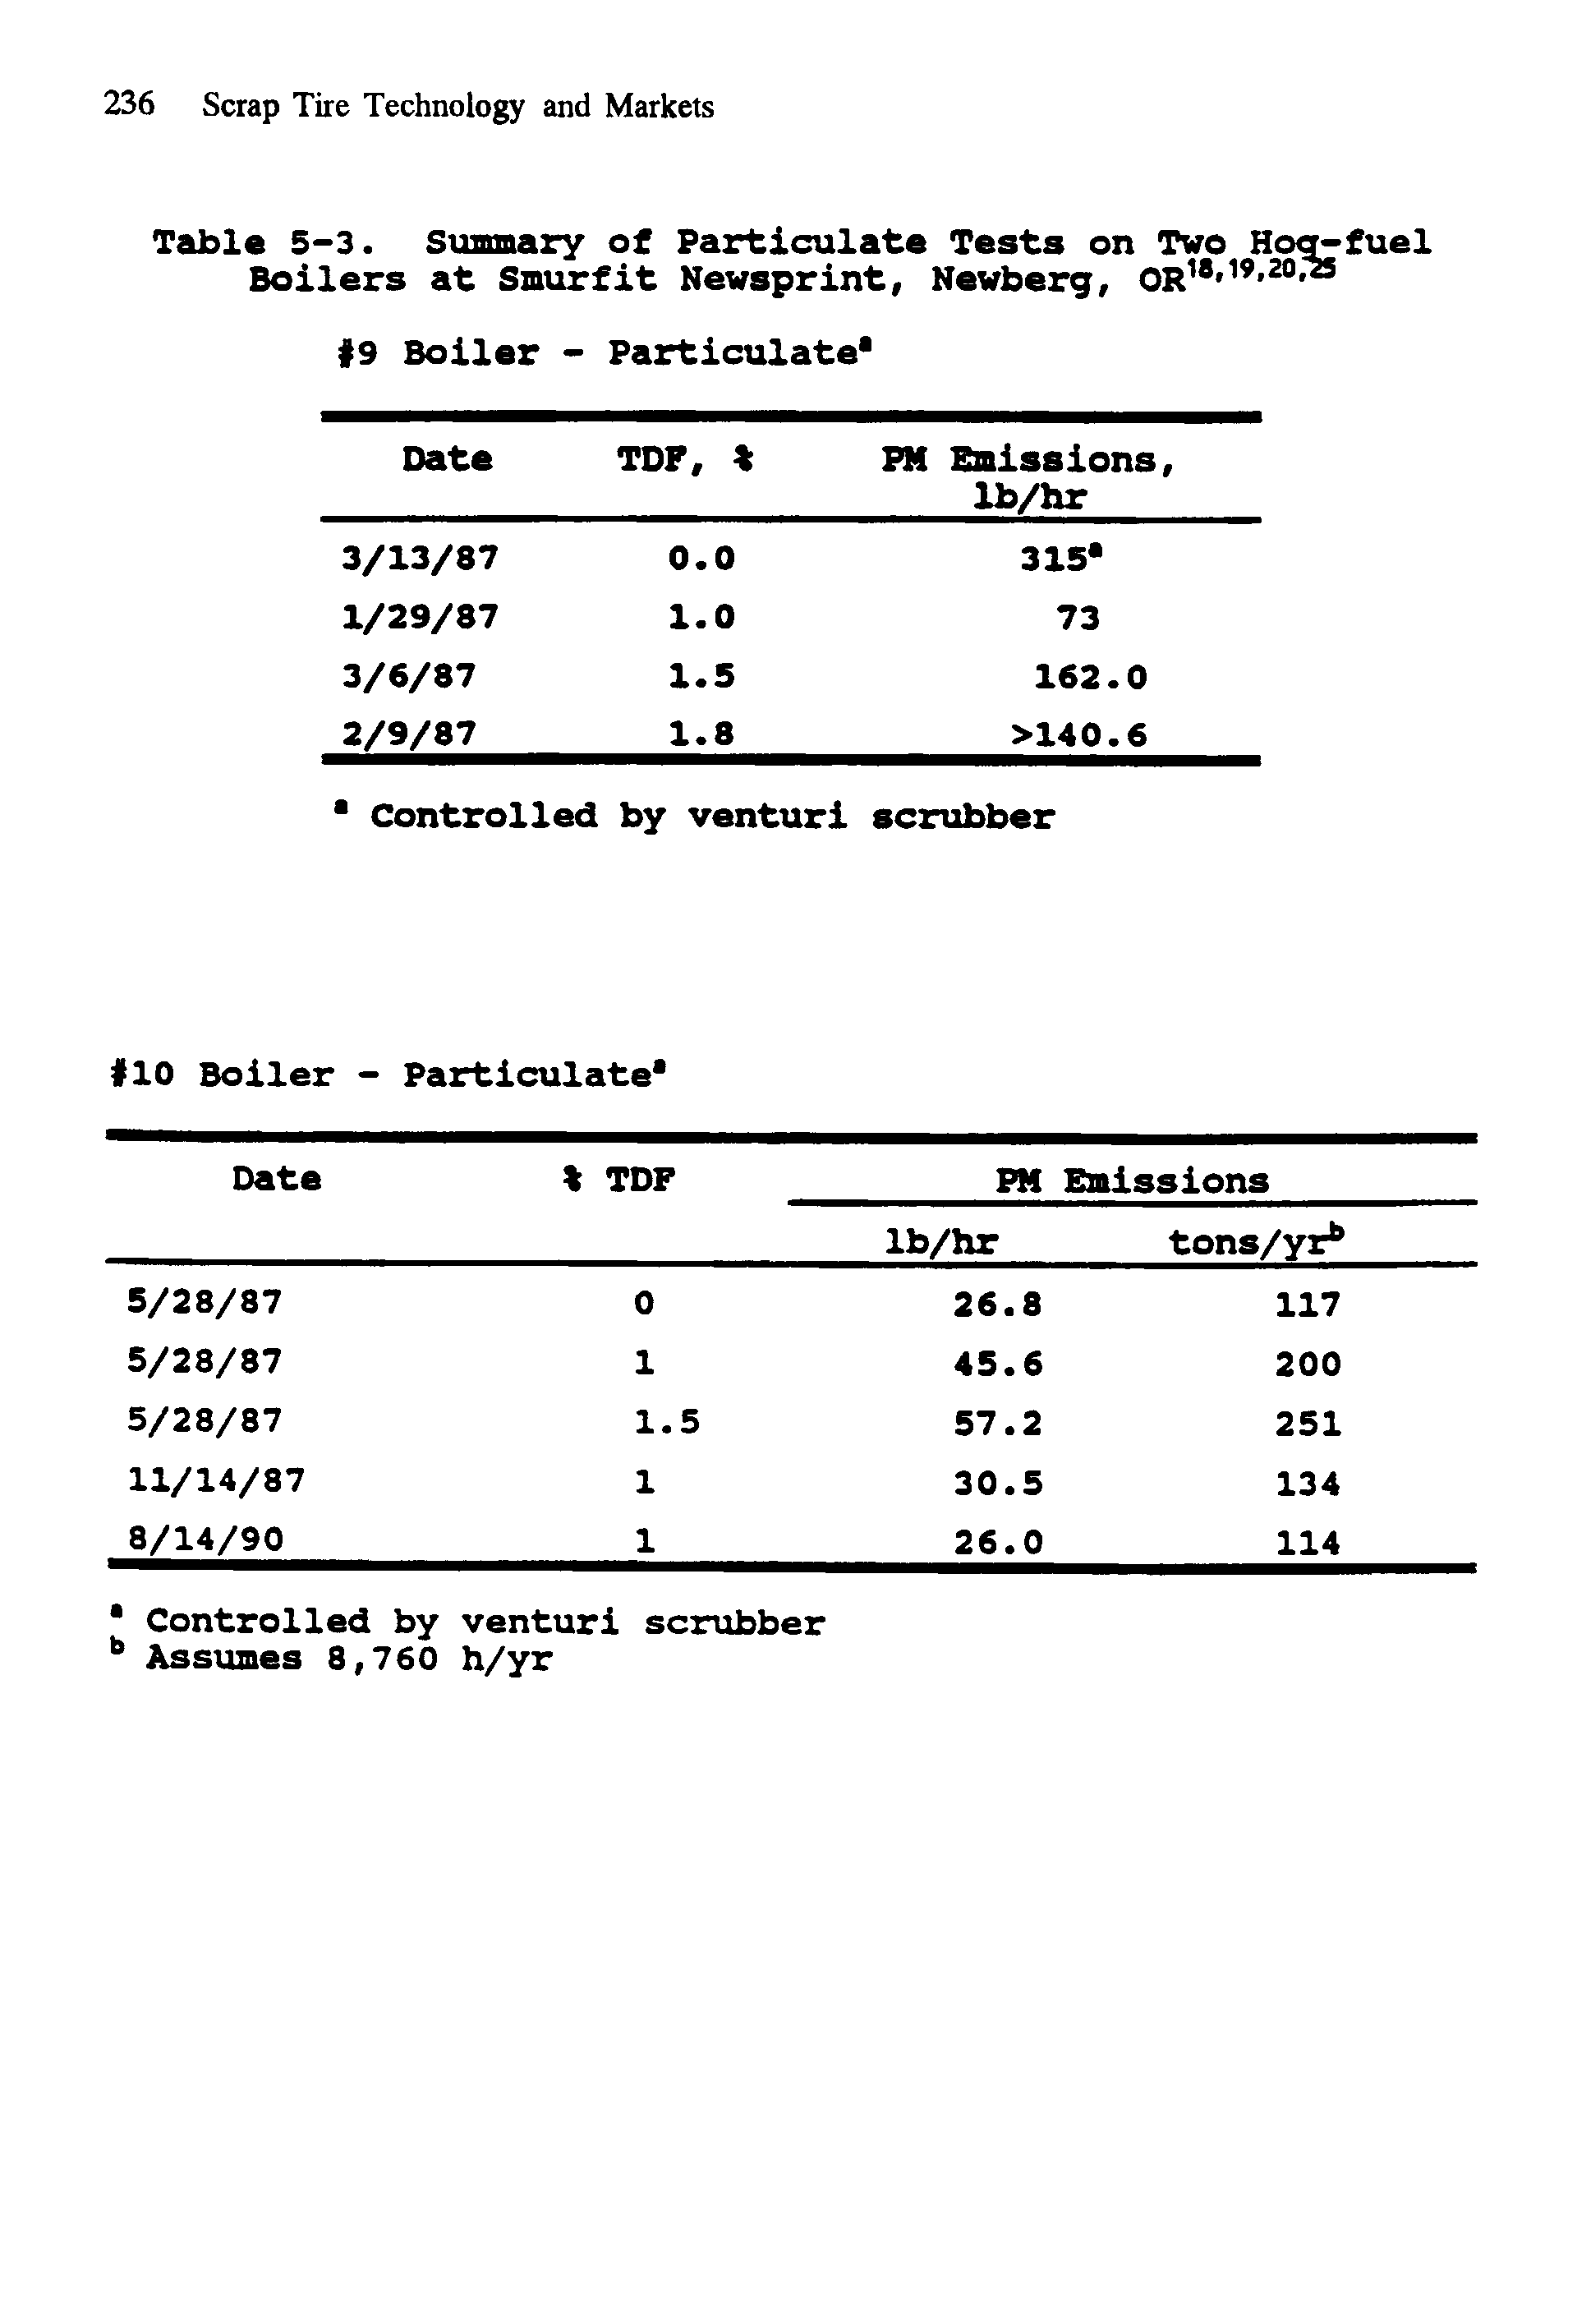 Table 5-3. Summary of Particulate Tests on Two Hog-fuel Boilers at Smurfit Newsprint, Newberg, OR18 19,20 5...